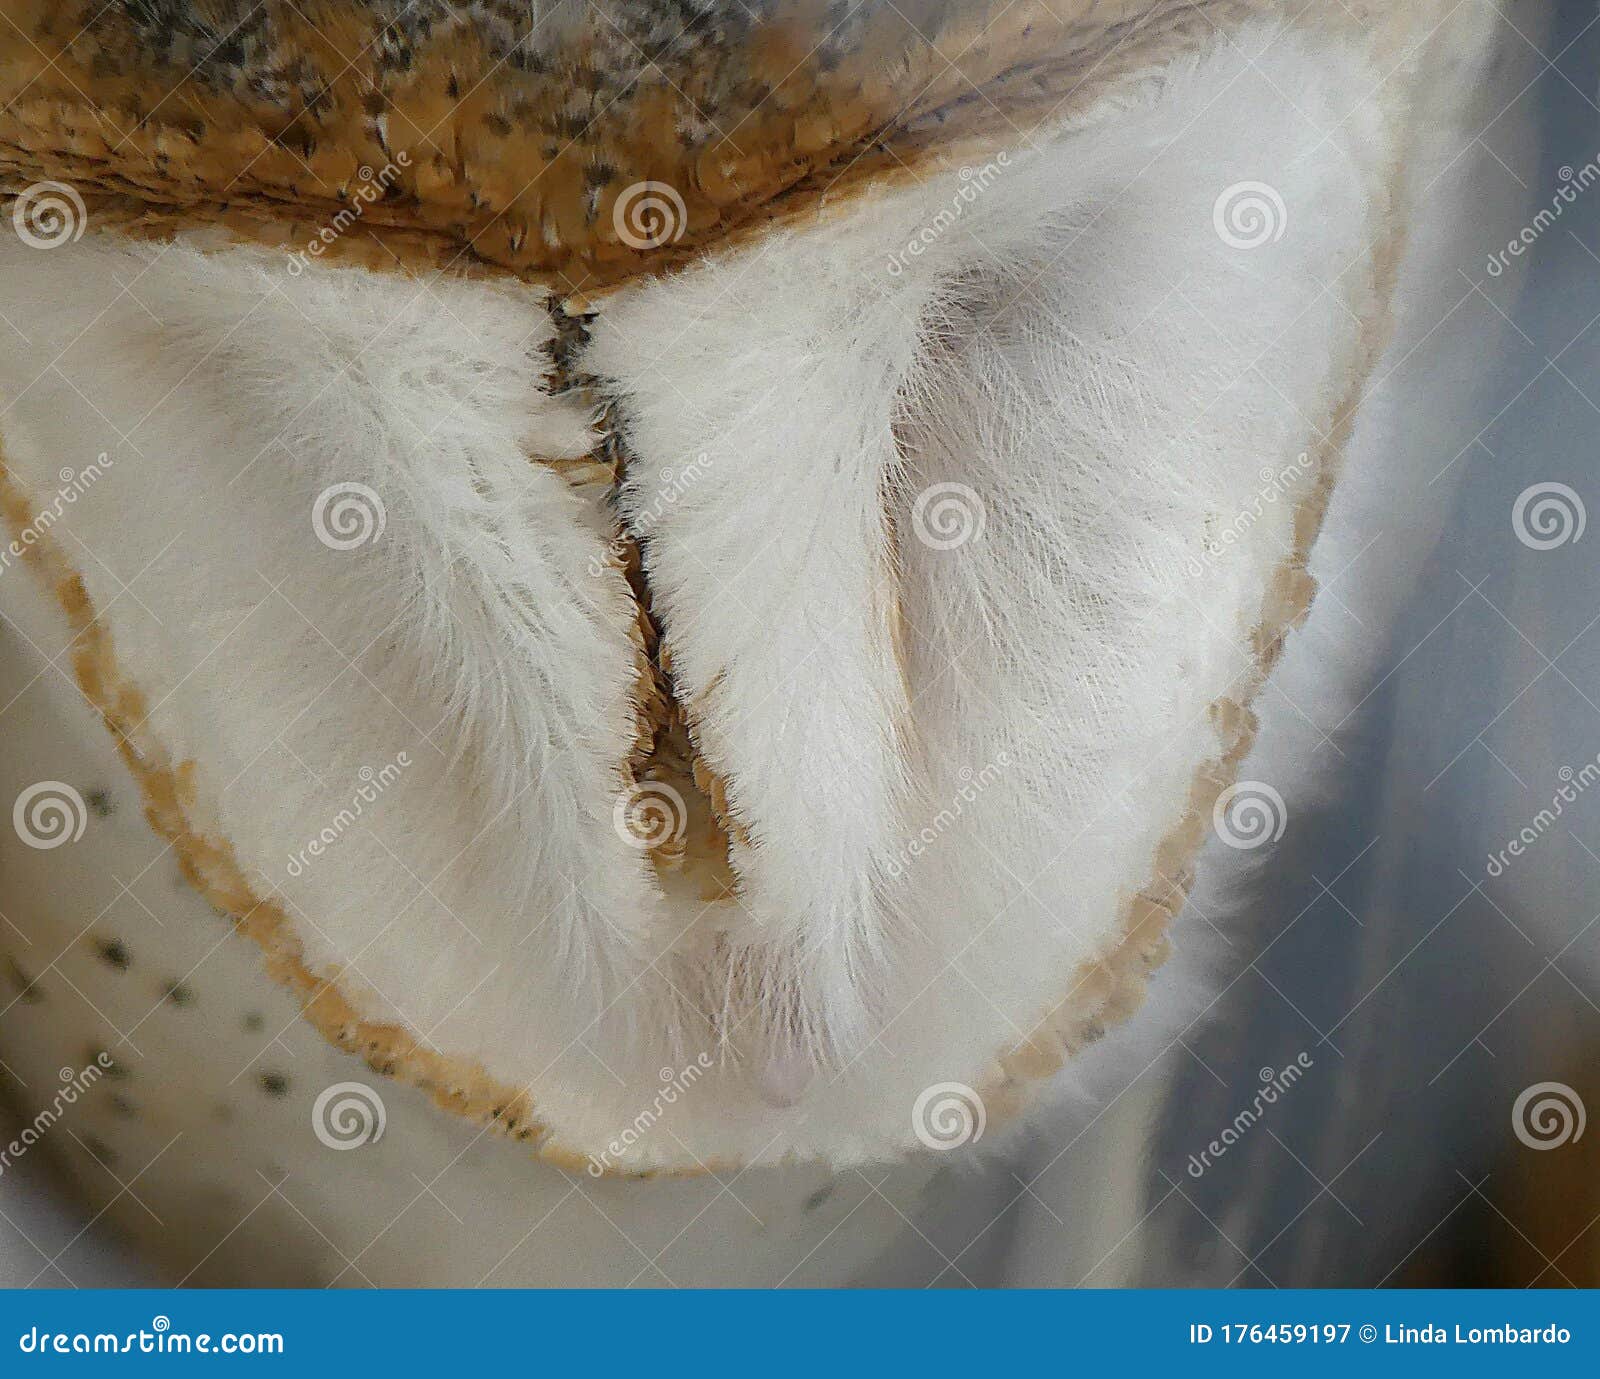 eastern barn owl in repose, detailed close up of its face